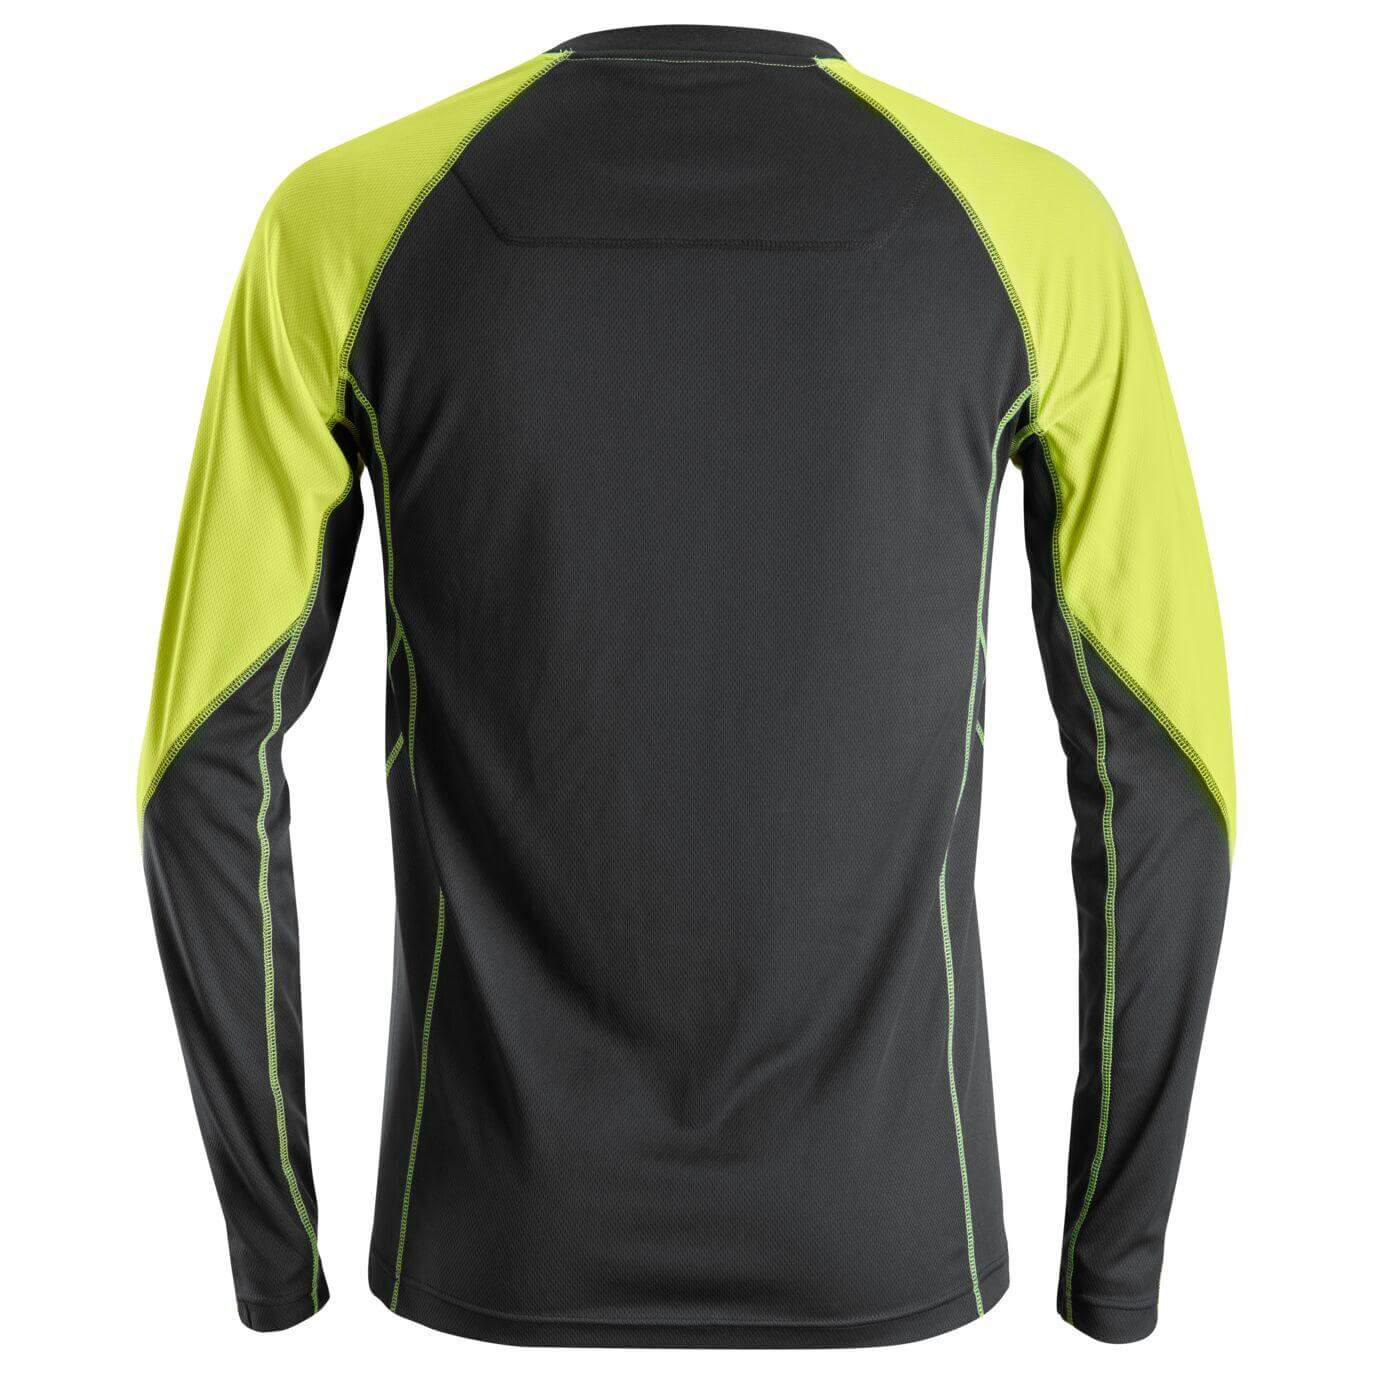 Snickers 2405 AllroundWork Neon Lightweight Long Sleeve T shirt Black Neon Yellow back #colour_black-neon-yellow